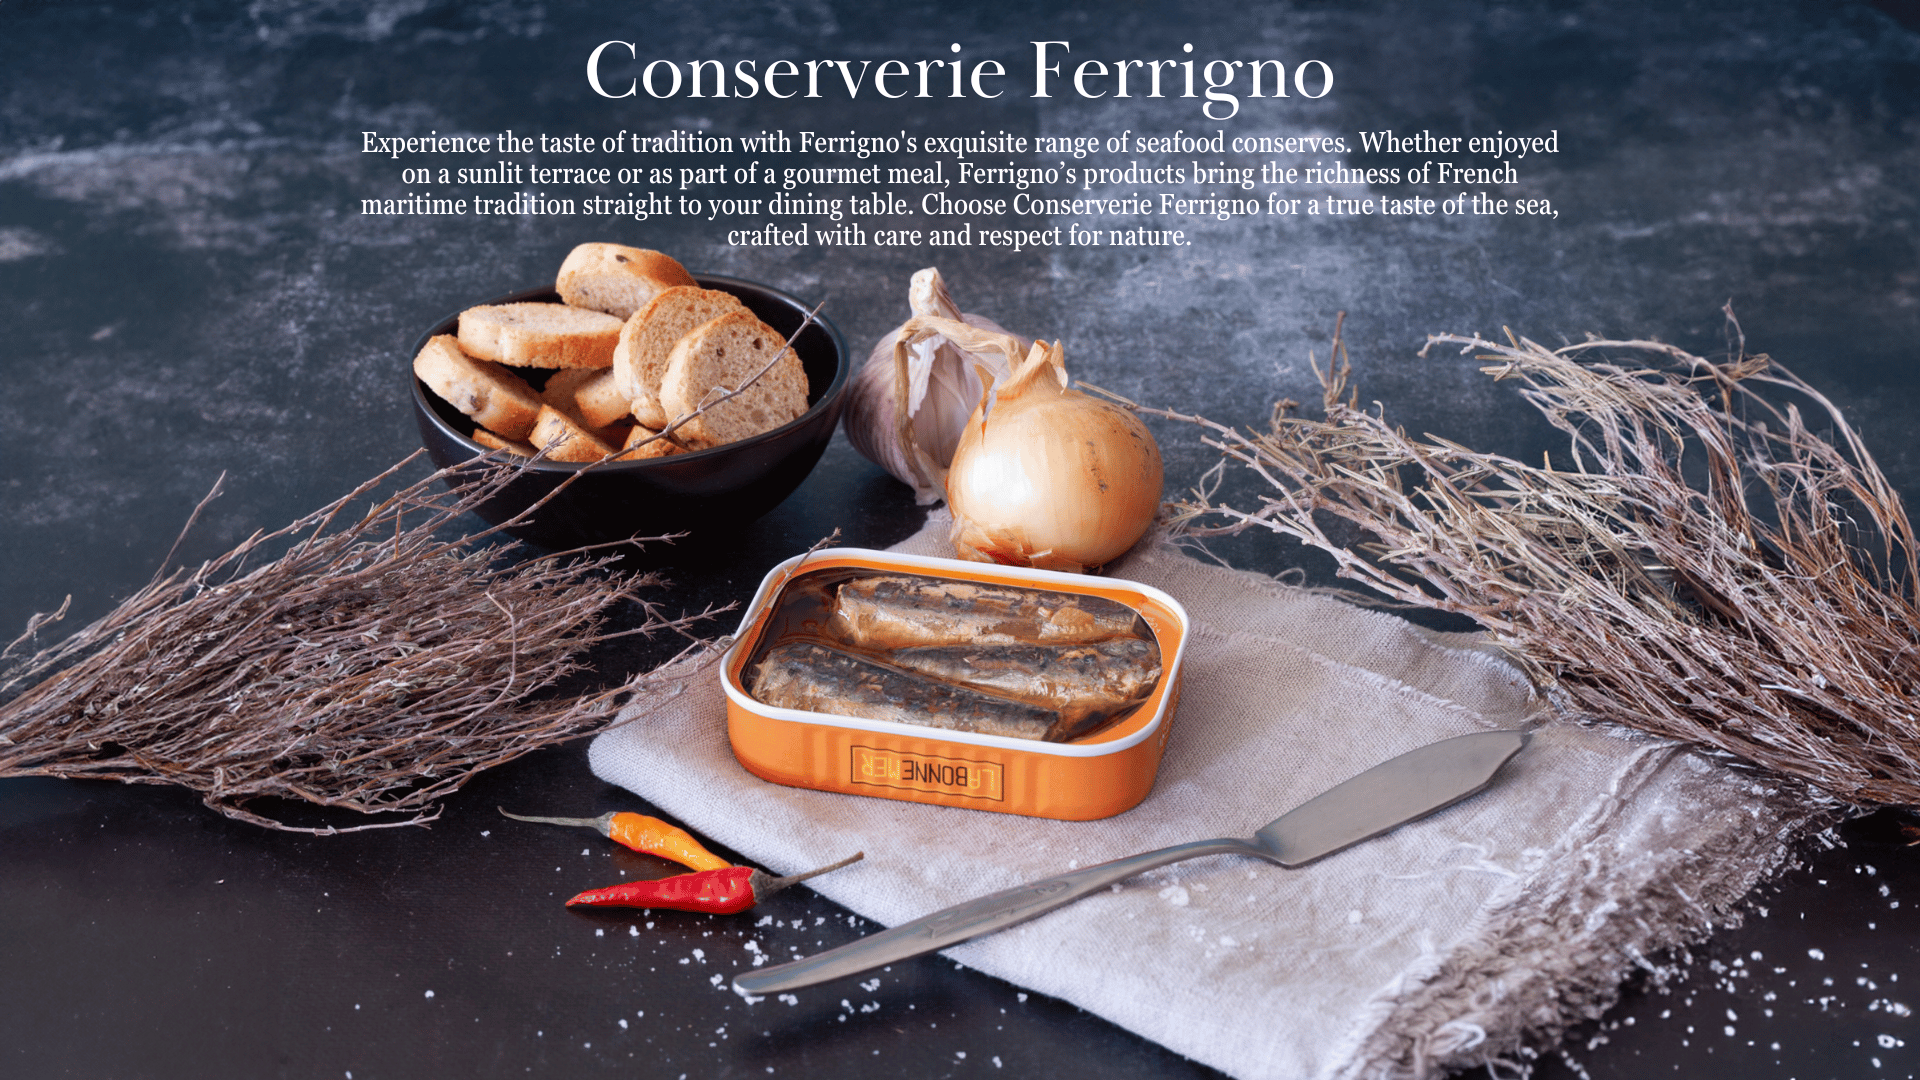 Discover Conserverie Ferrigno, a family-owned cannery in Port-Saint-Louis-du-Rhône, crafting France's finest seafood preserves for over 70 years. Experience tradition and sustainability in every product.